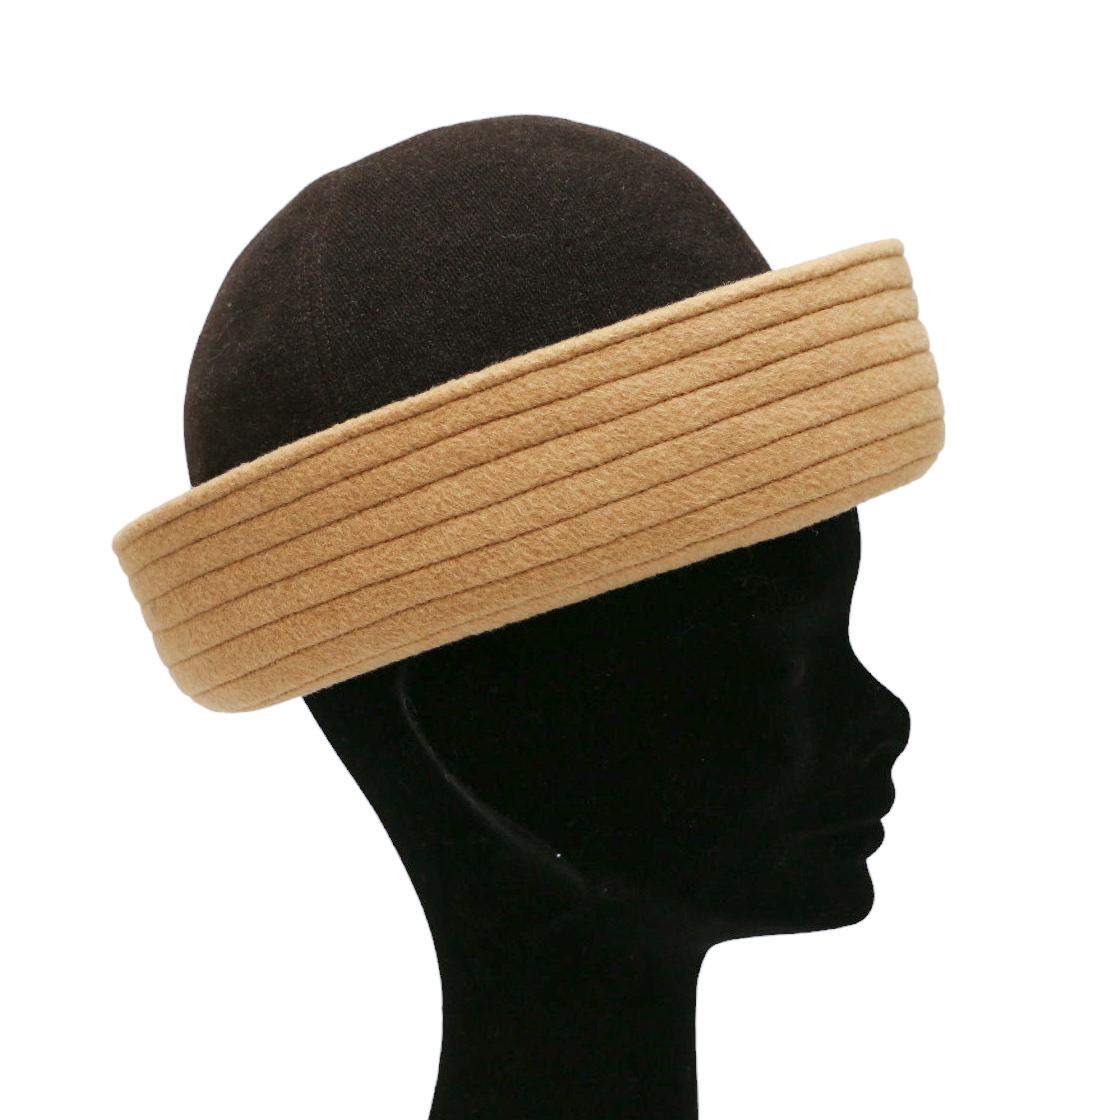 Beautiful hat in brown wool made by Motsch for Hermès
Condition : excellent
Made in France
Material : 100% wool, trim in camel wool
Color : brown
Size : 57
Year : vintage
Details : bob shaped hat with a light brown contrasting reverse, Hermès